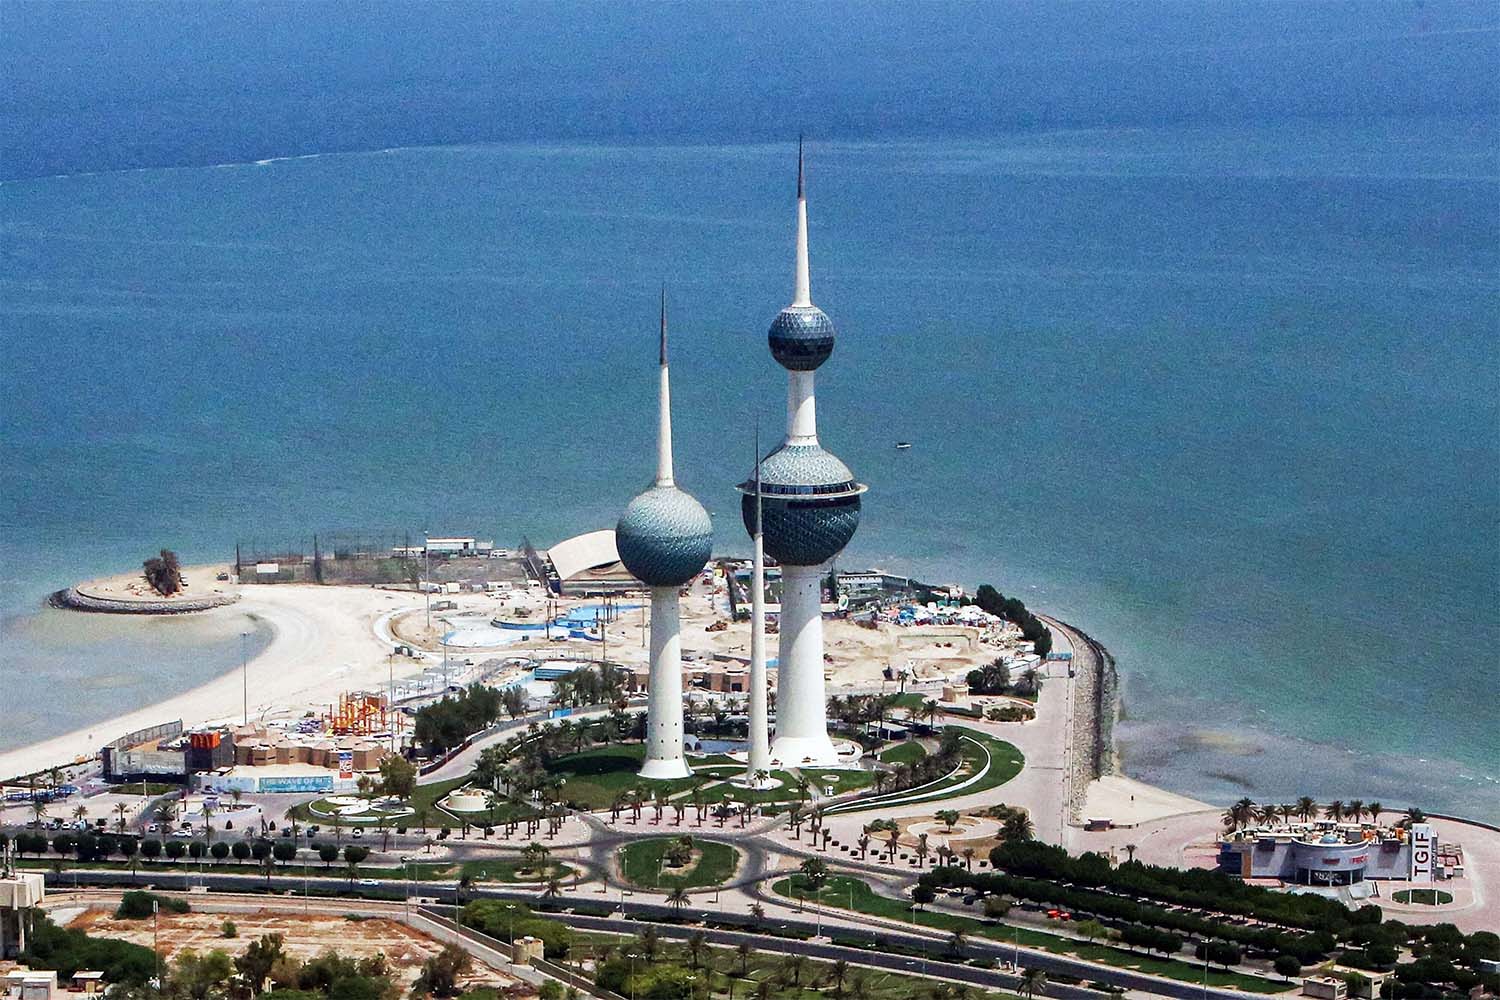 Kuwait Touristic Enterprises plans to execute 95 initiatives and projects costing 380 million dinars over 10 years